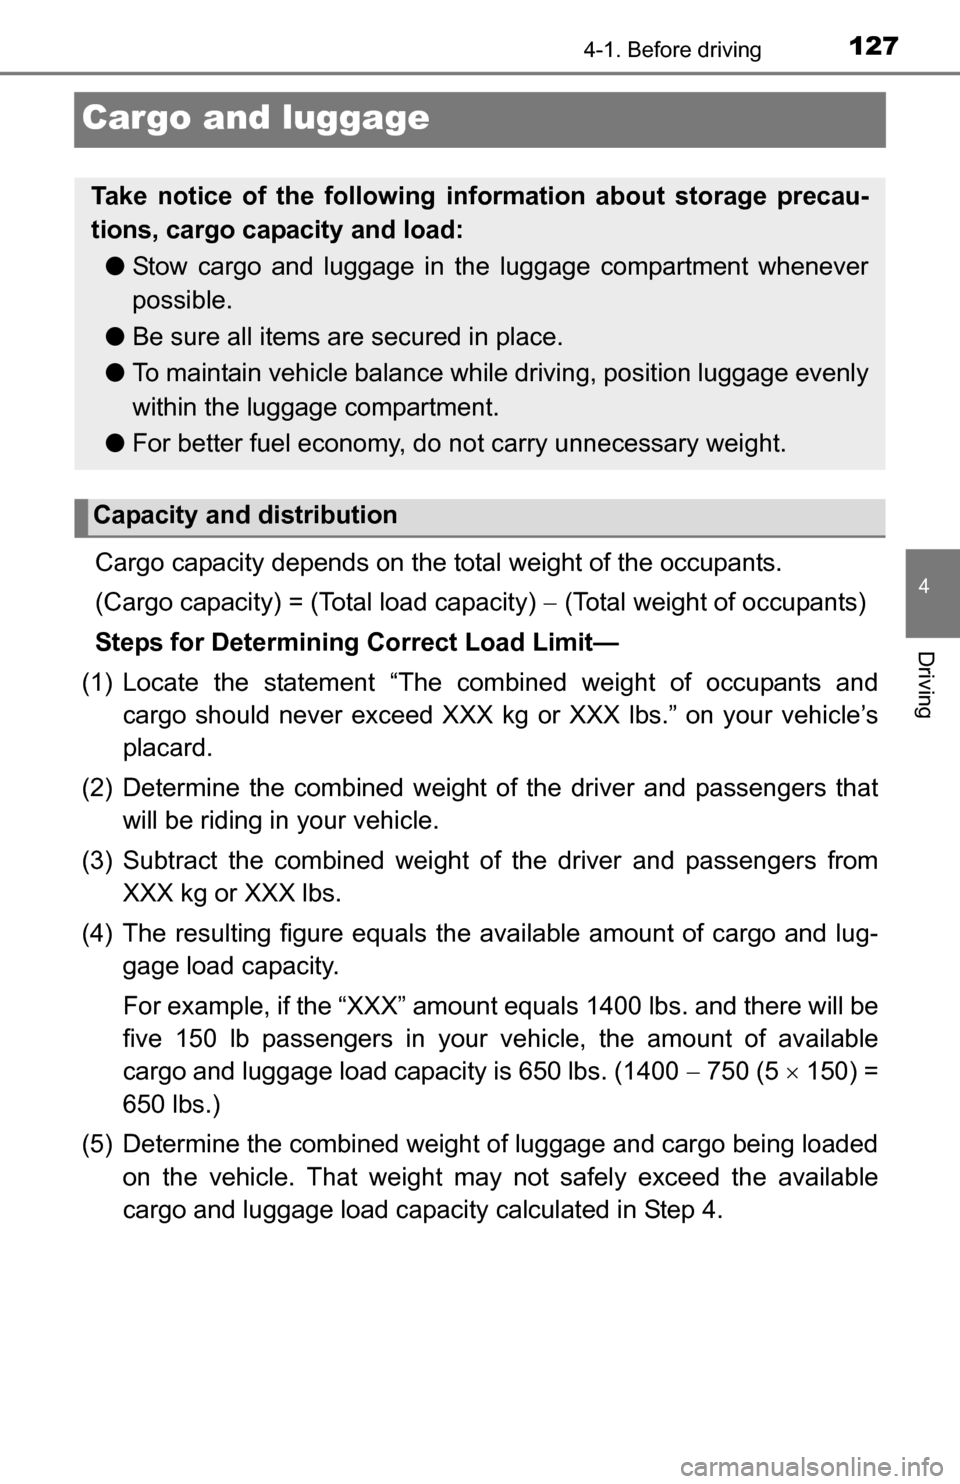 TOYOTA YARIS 2016 3.G Owners Manual 1274-1. Before driving
4
Driving
Cargo and luggage
Cargo capacity depends on the total weight of the occupants.
(Cargo capacity) = (Total load capacity)  (Total weight of occupants)
Steps for Deter